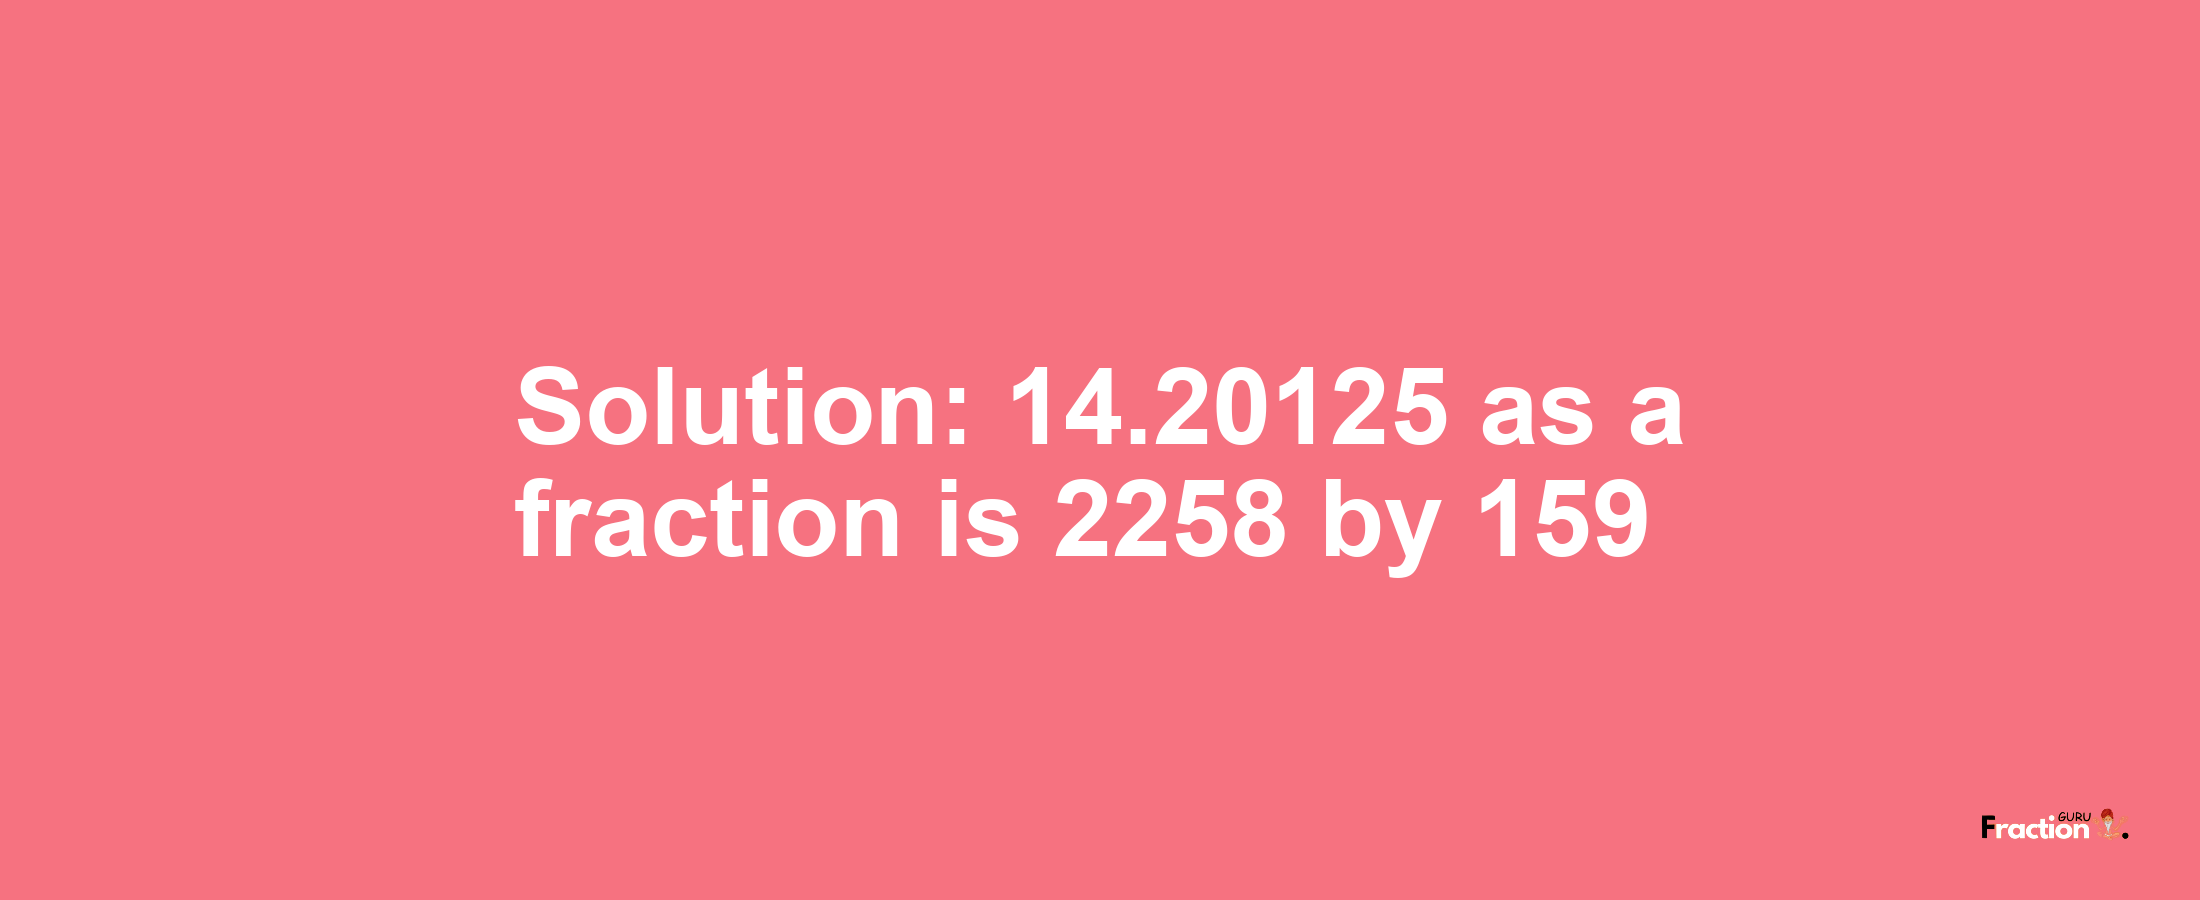 Solution:14.20125 as a fraction is 2258/159